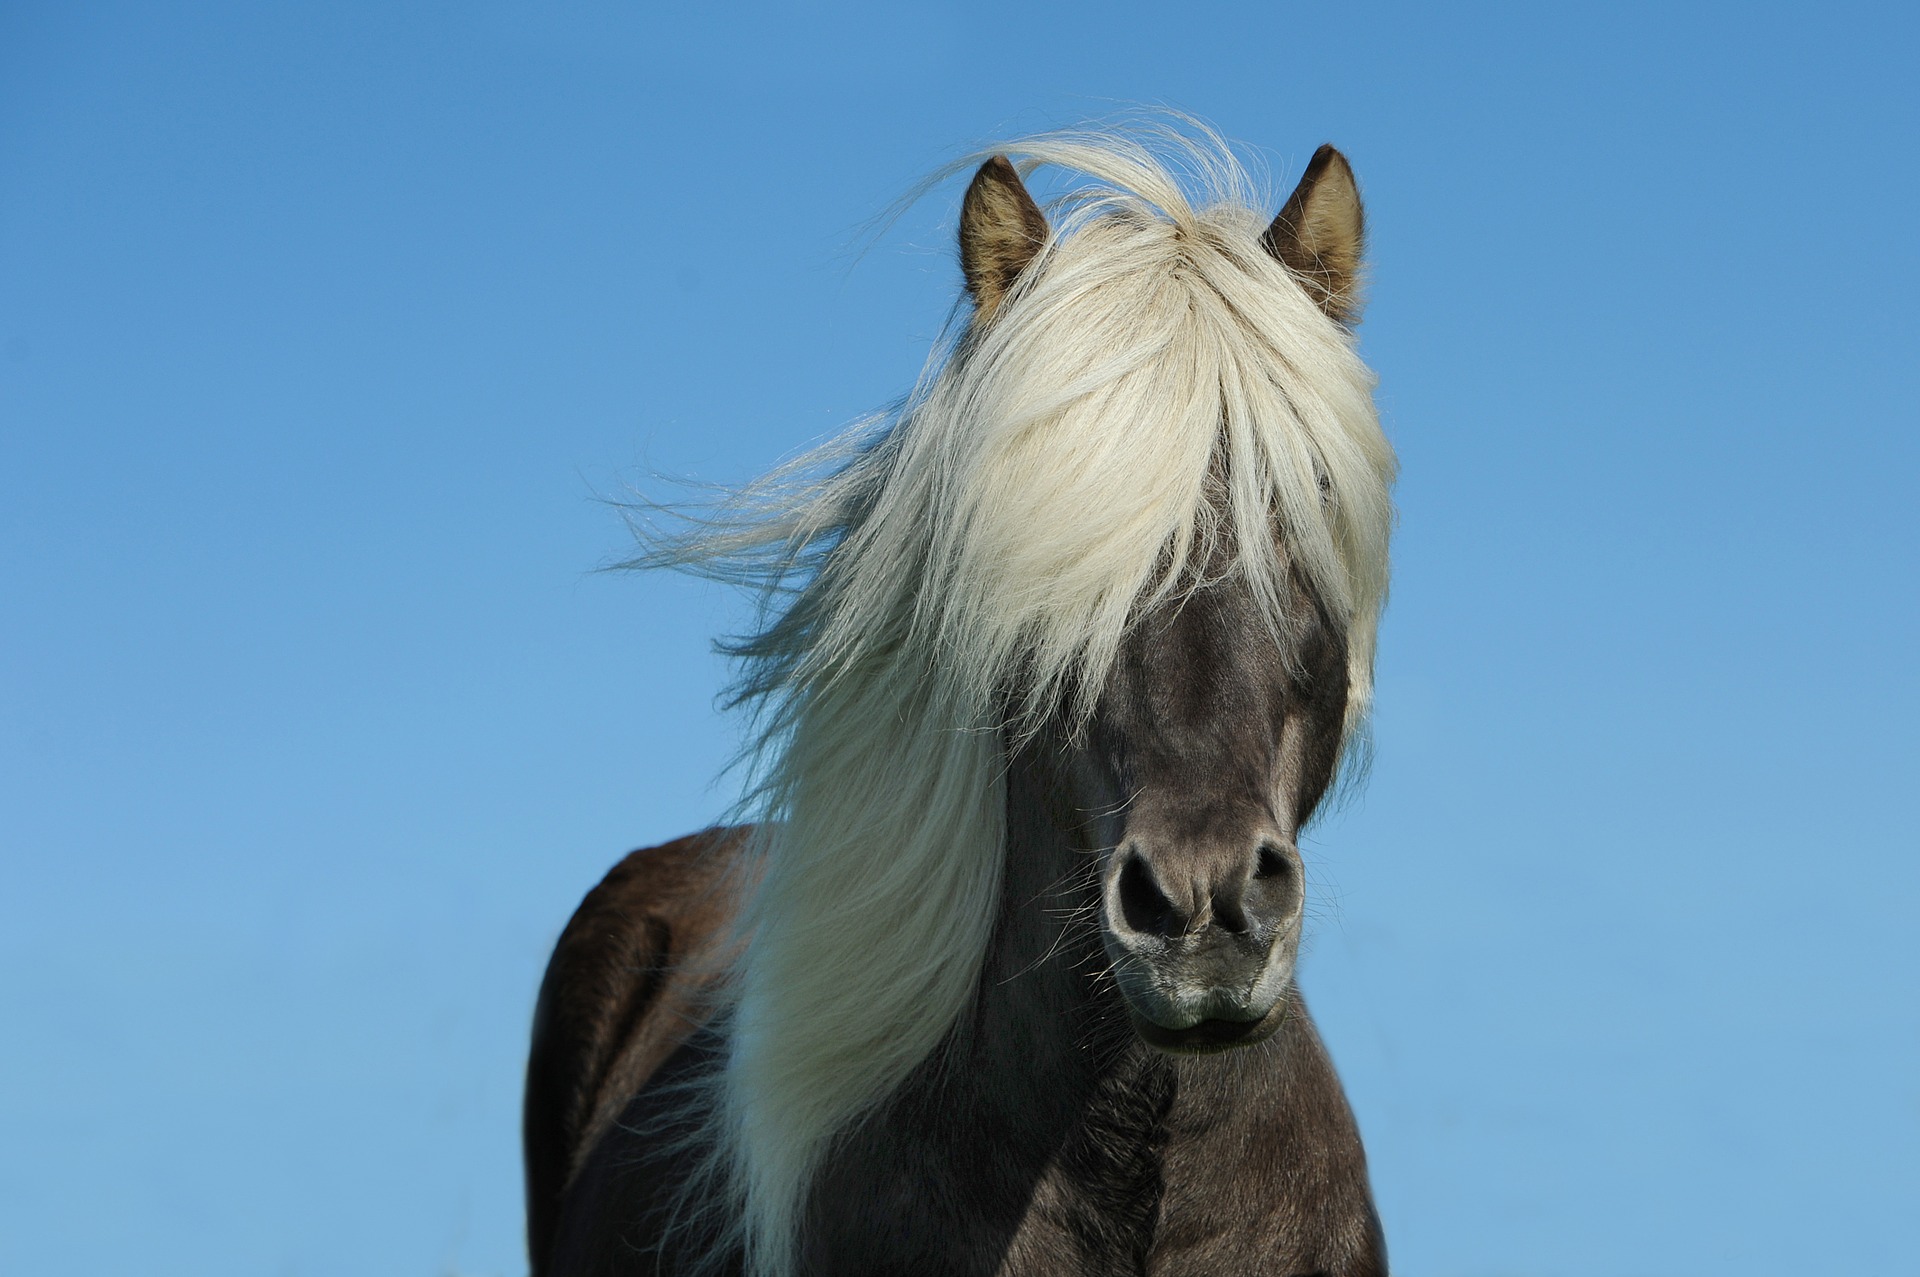 Best Things to do in Iceland - See the Icelandic Ponies